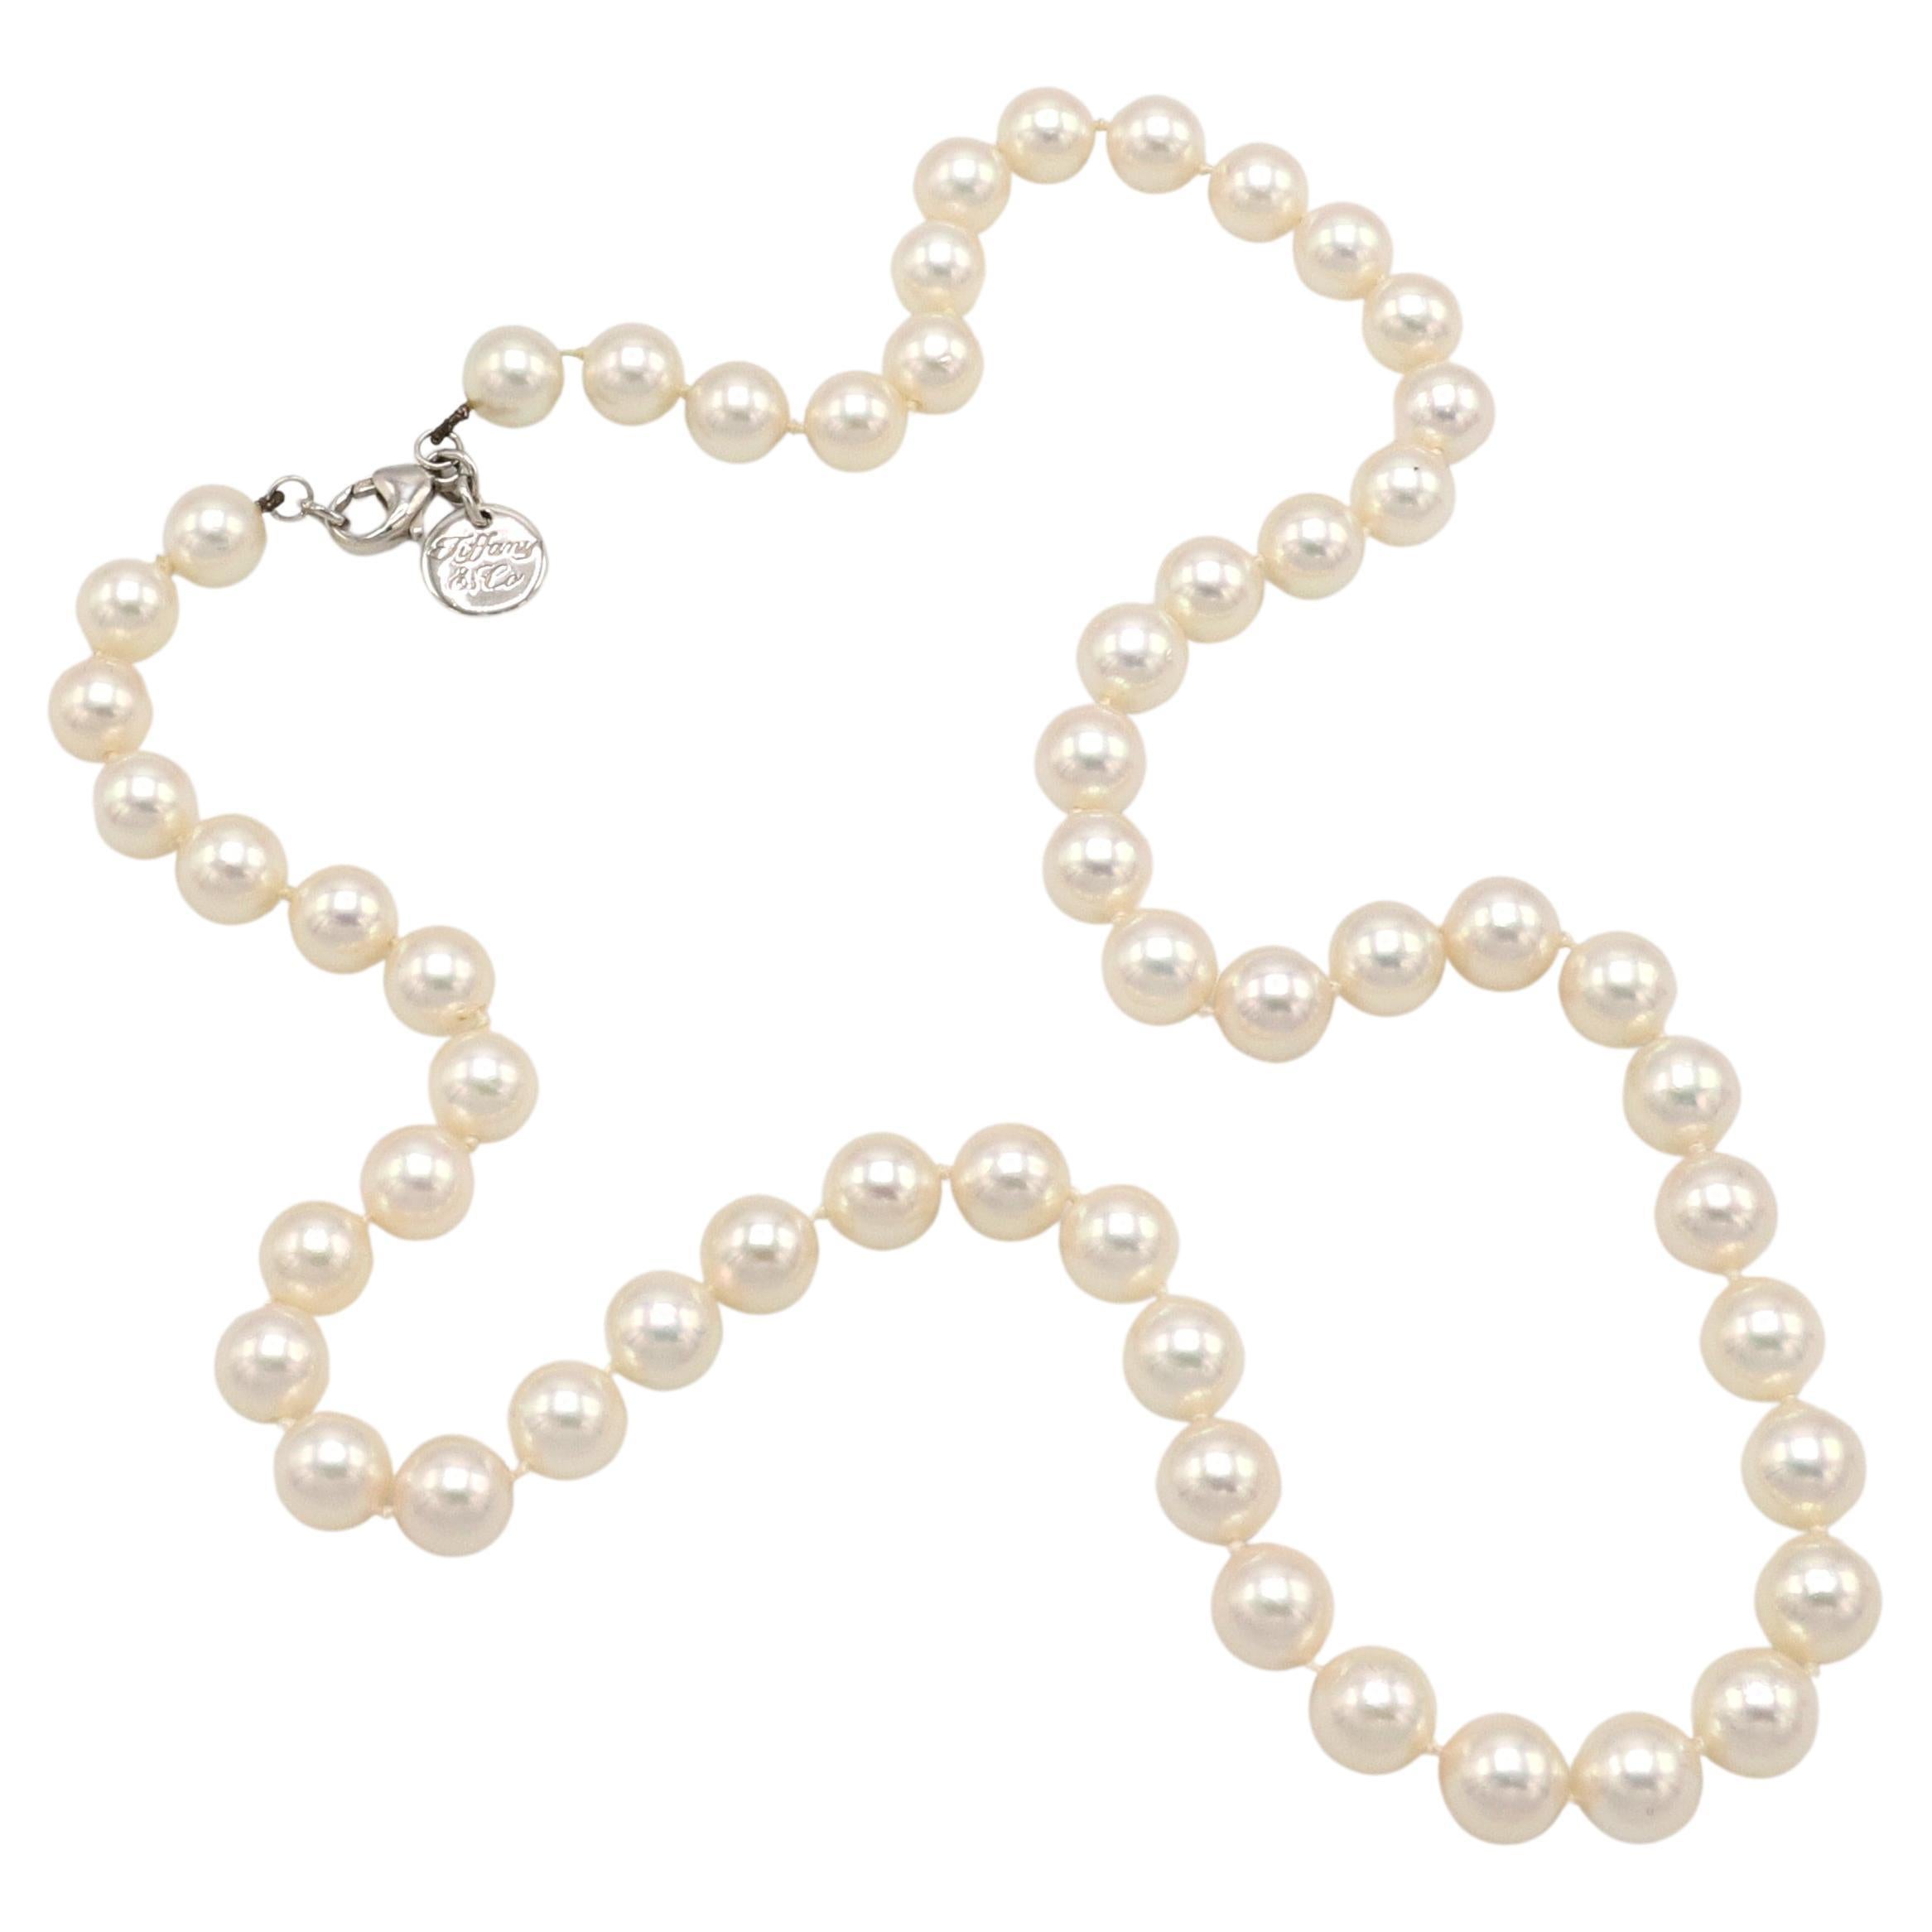 Tiffany & Co. Essential Cultured Pearl 18 Karat White Gold Necklace 